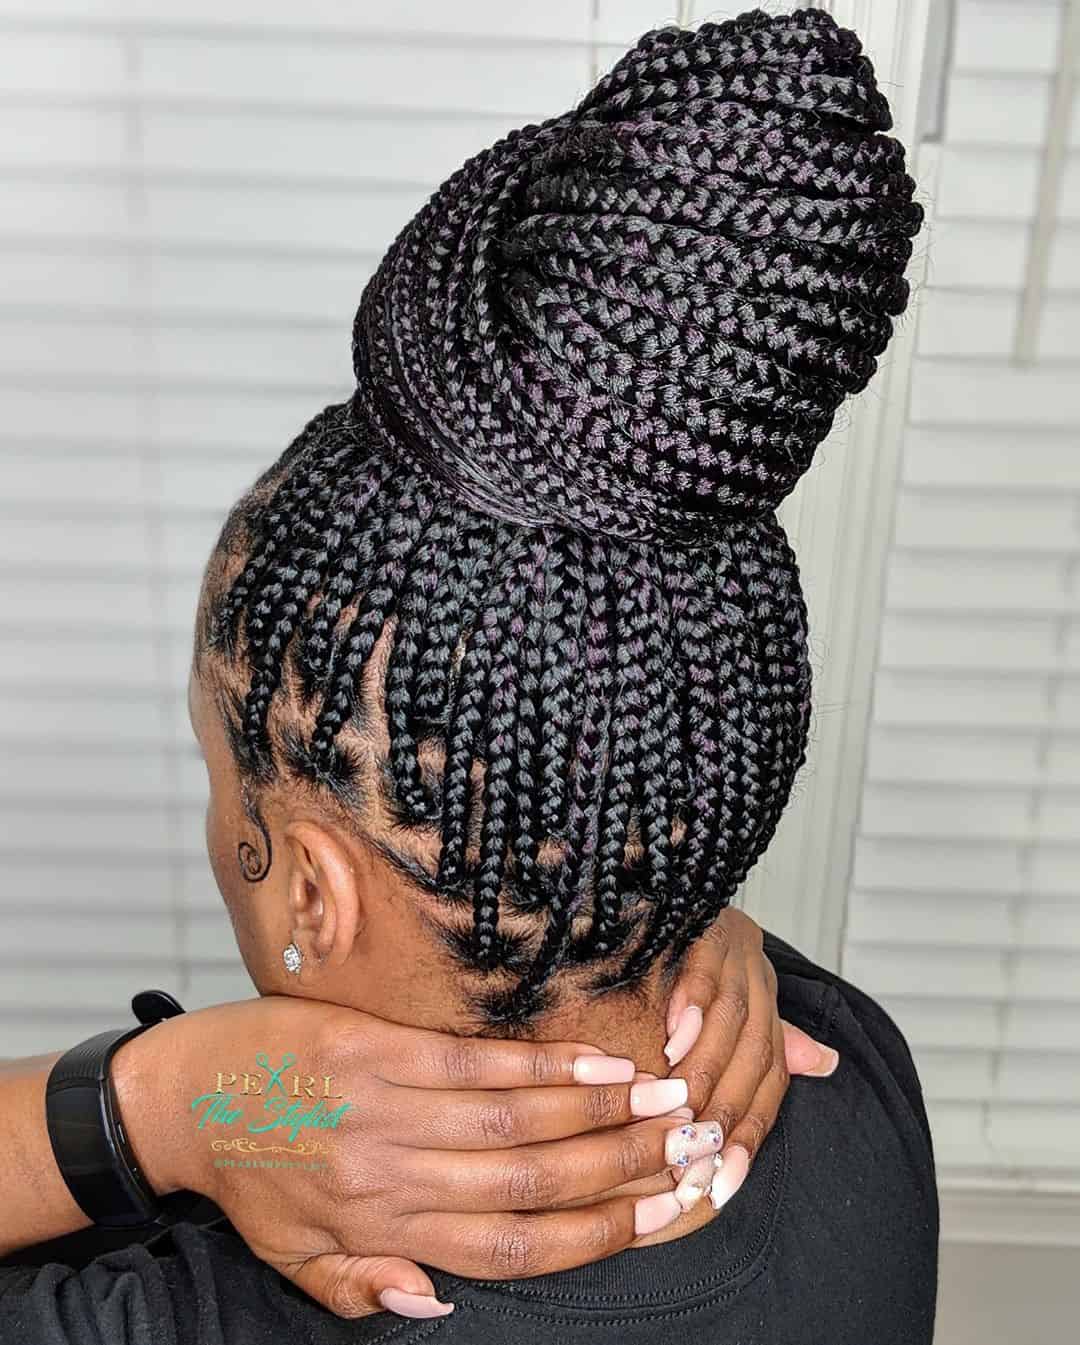 Buttonless braids with curly ends / side braids